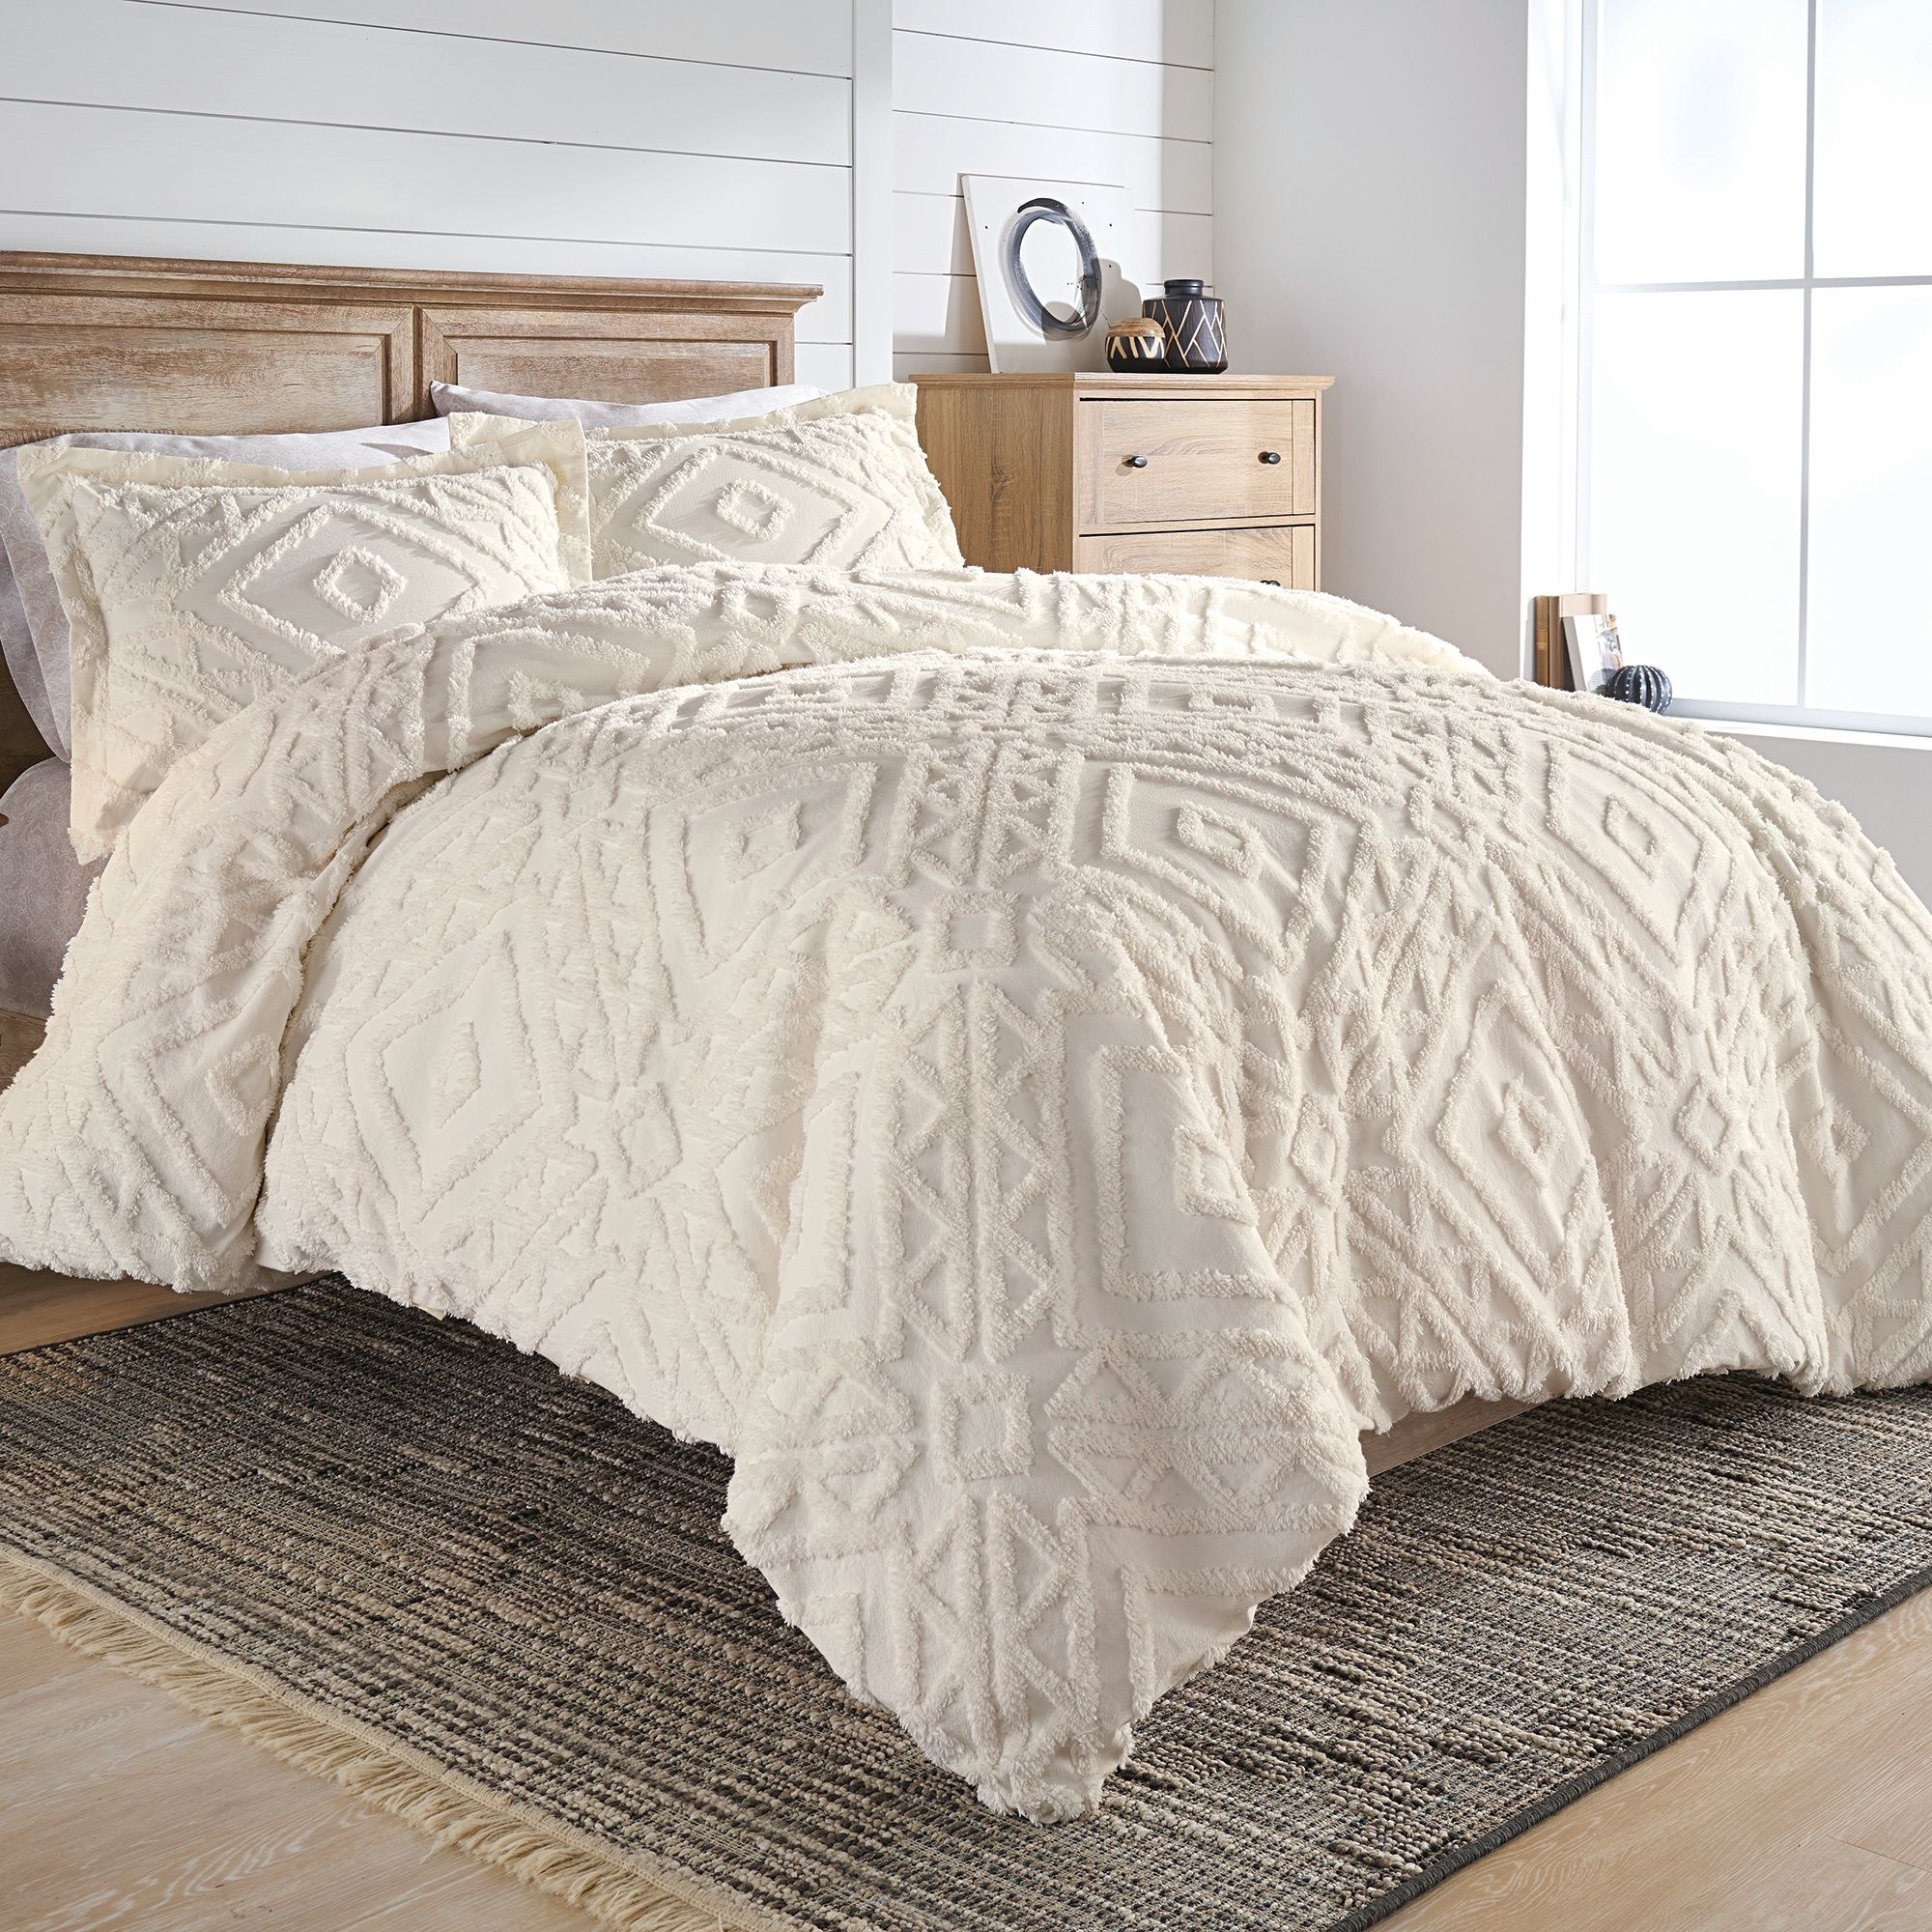 The white patterned duvet cover and shams on a bed